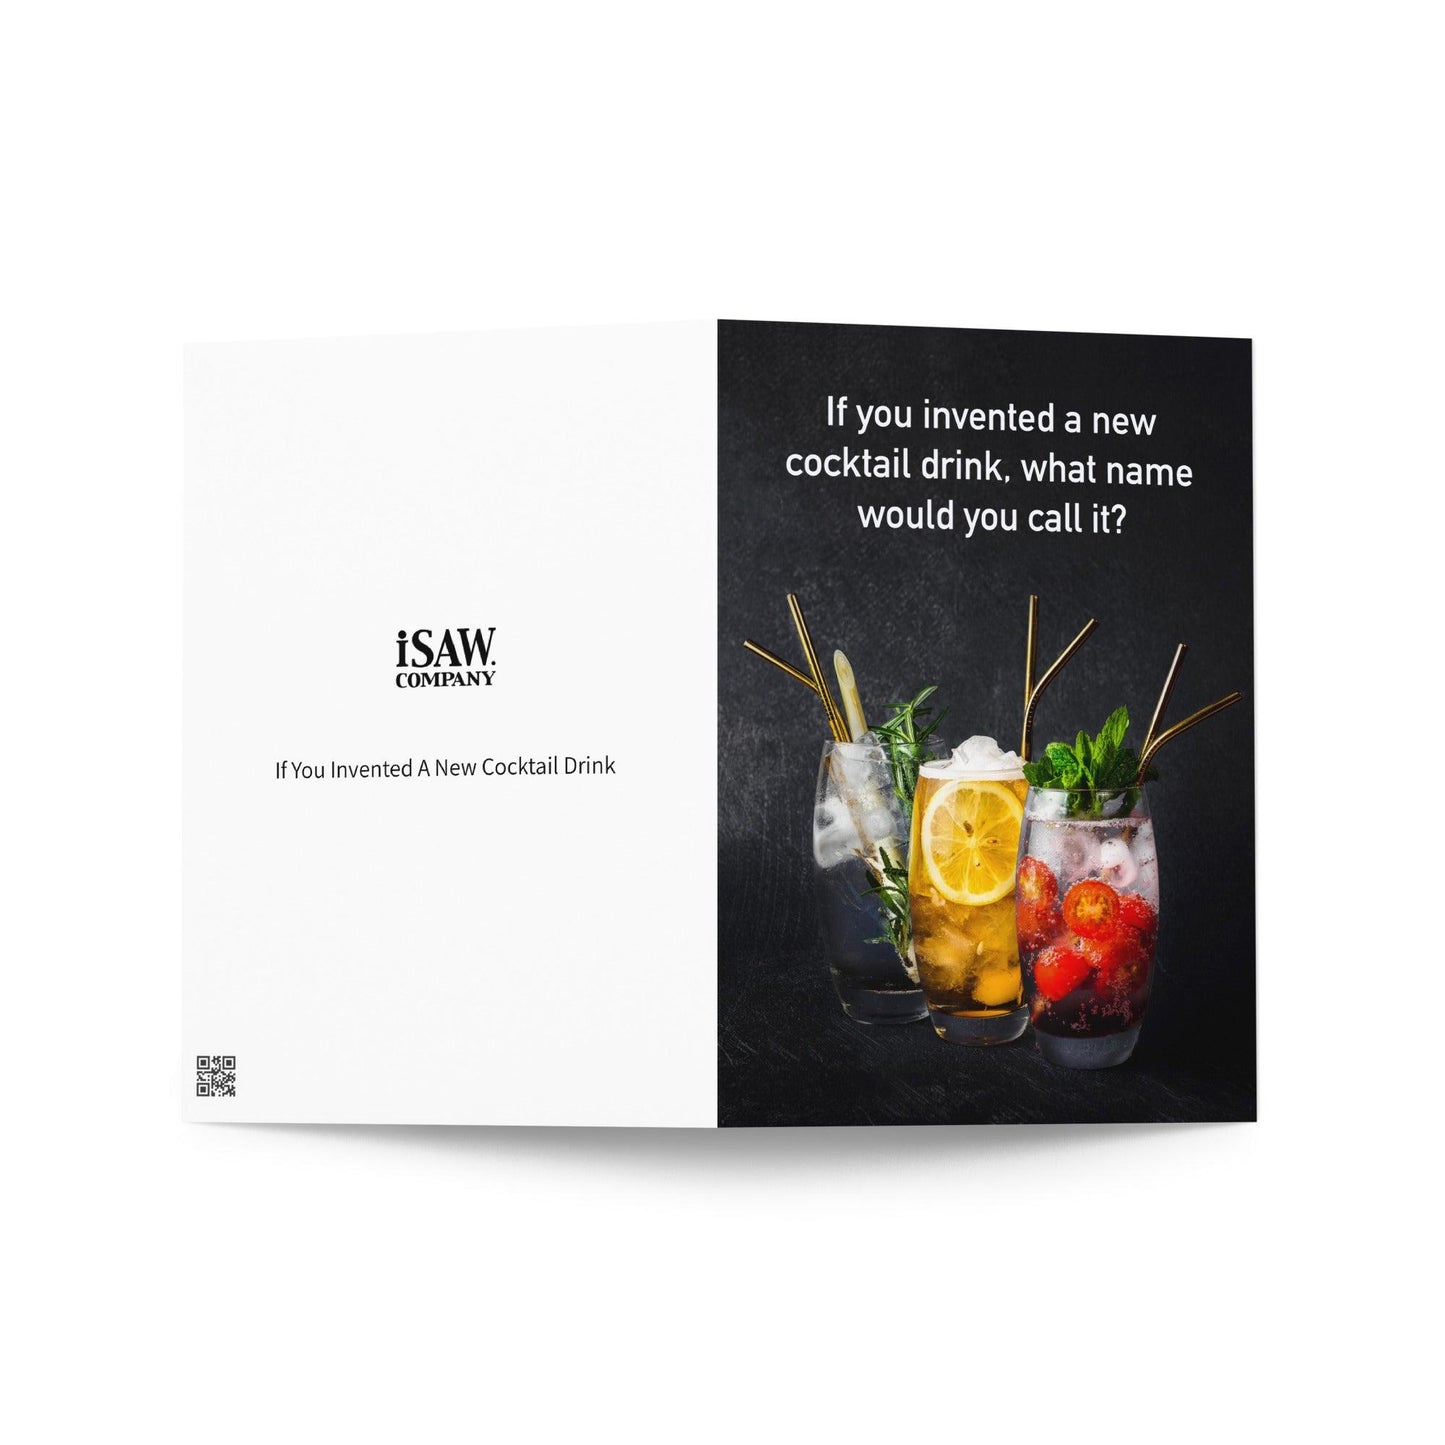 If You Invented A New Cocktail Drink - Note Card - iSAW Company